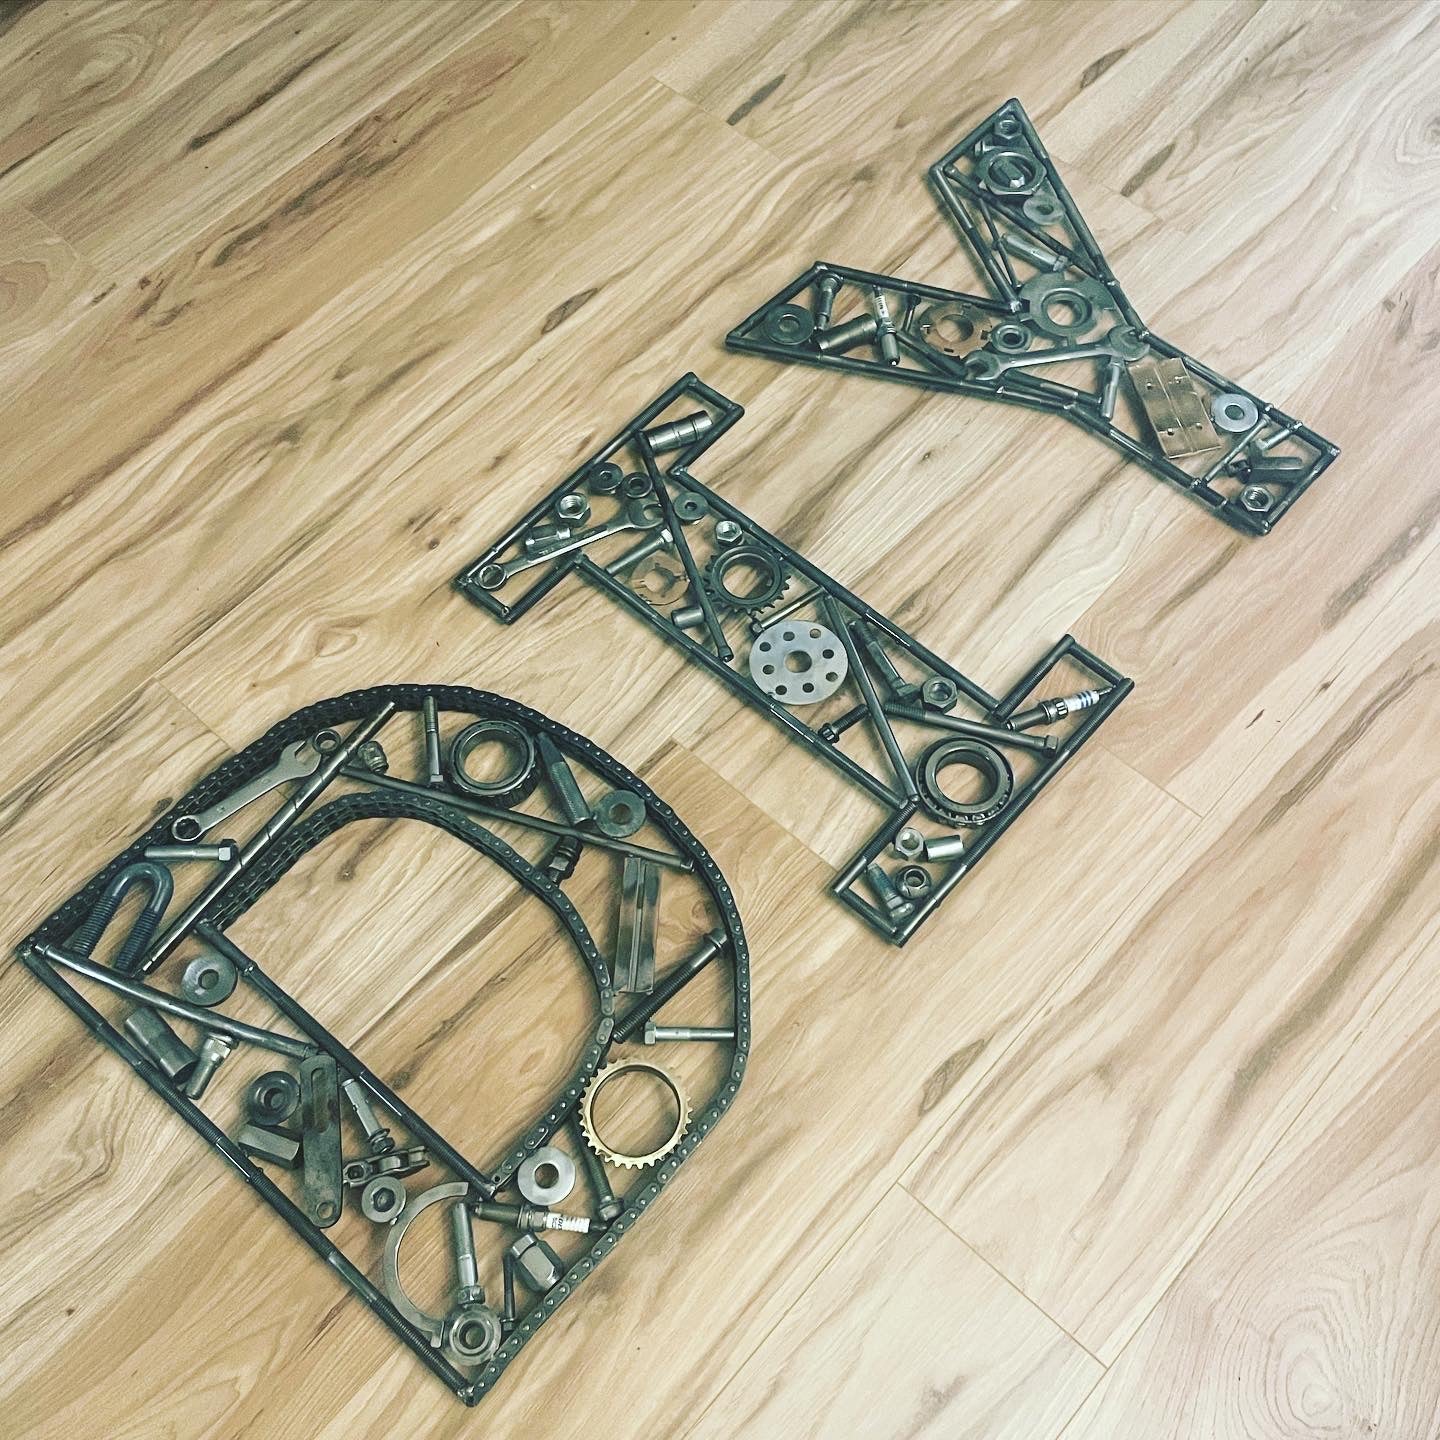 The letters DIY made out of real car parts.